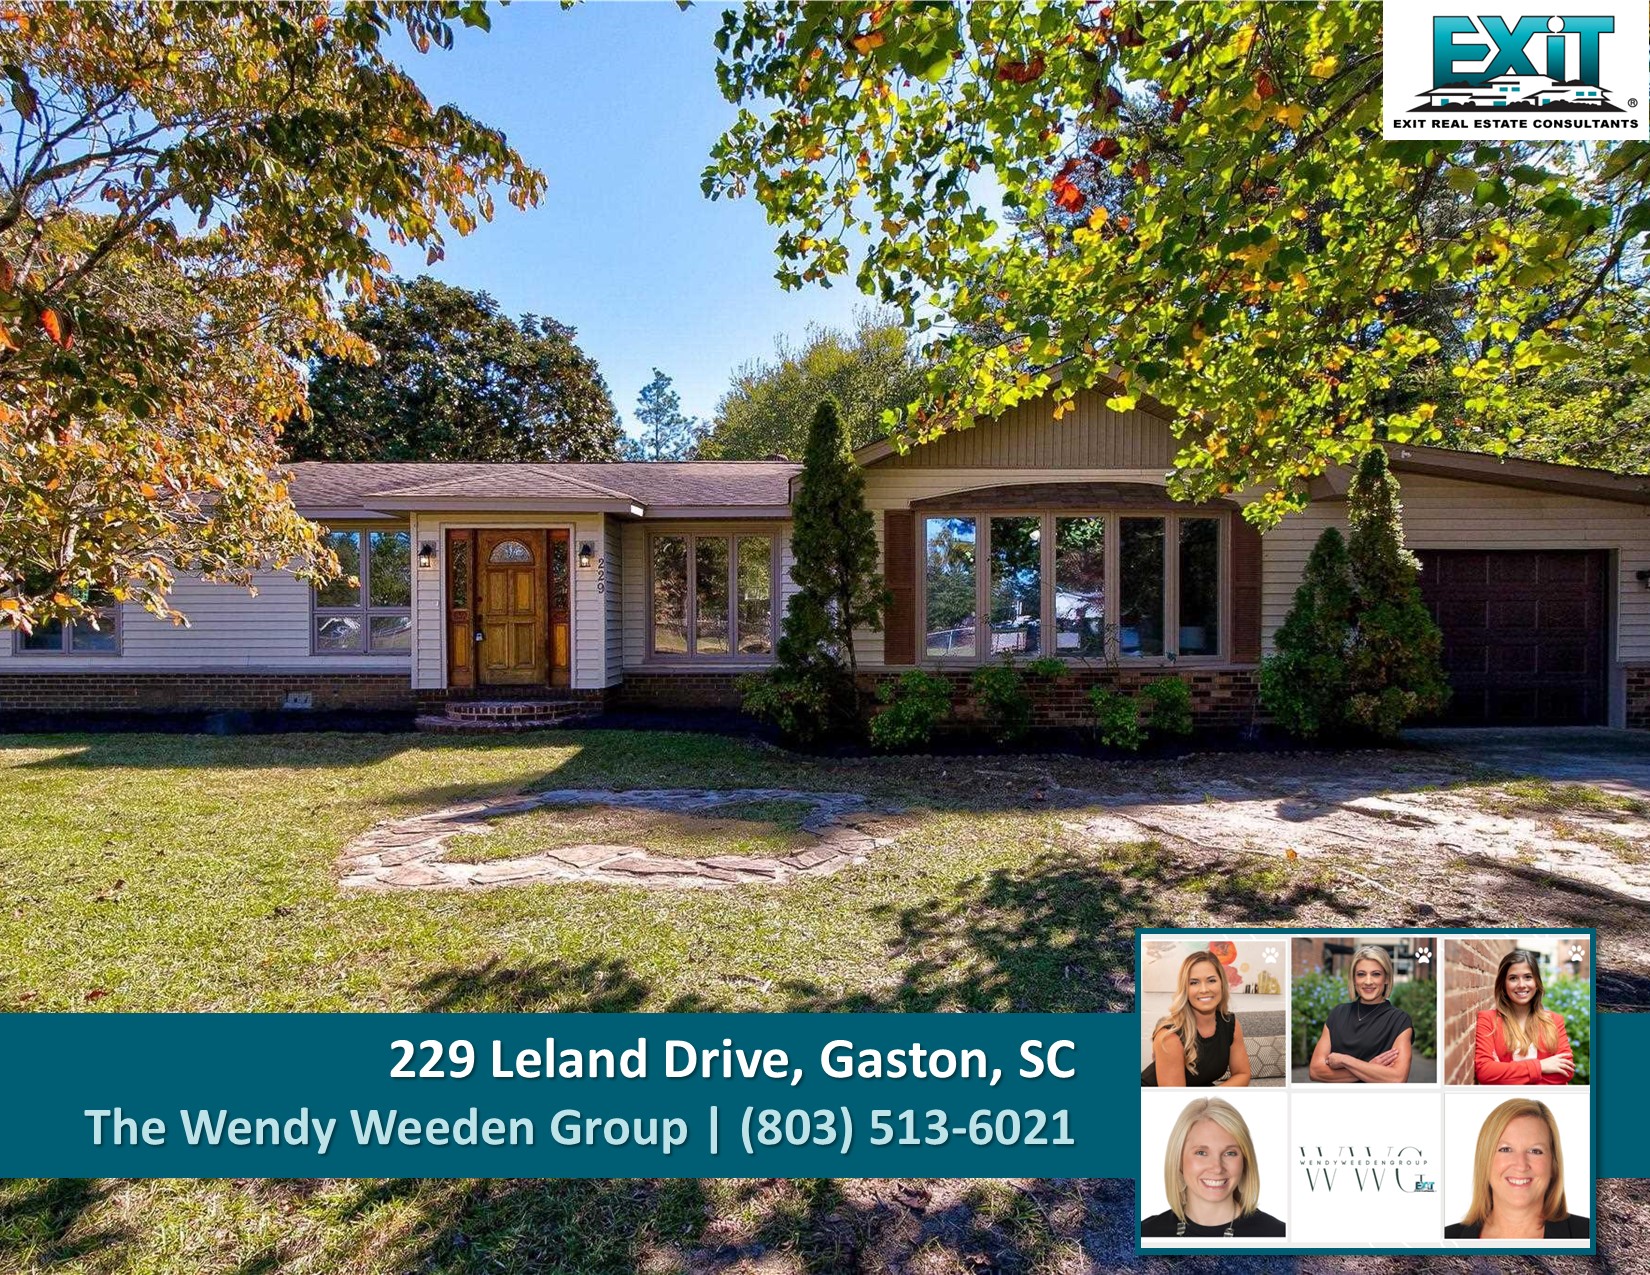 Just listed in Gaston